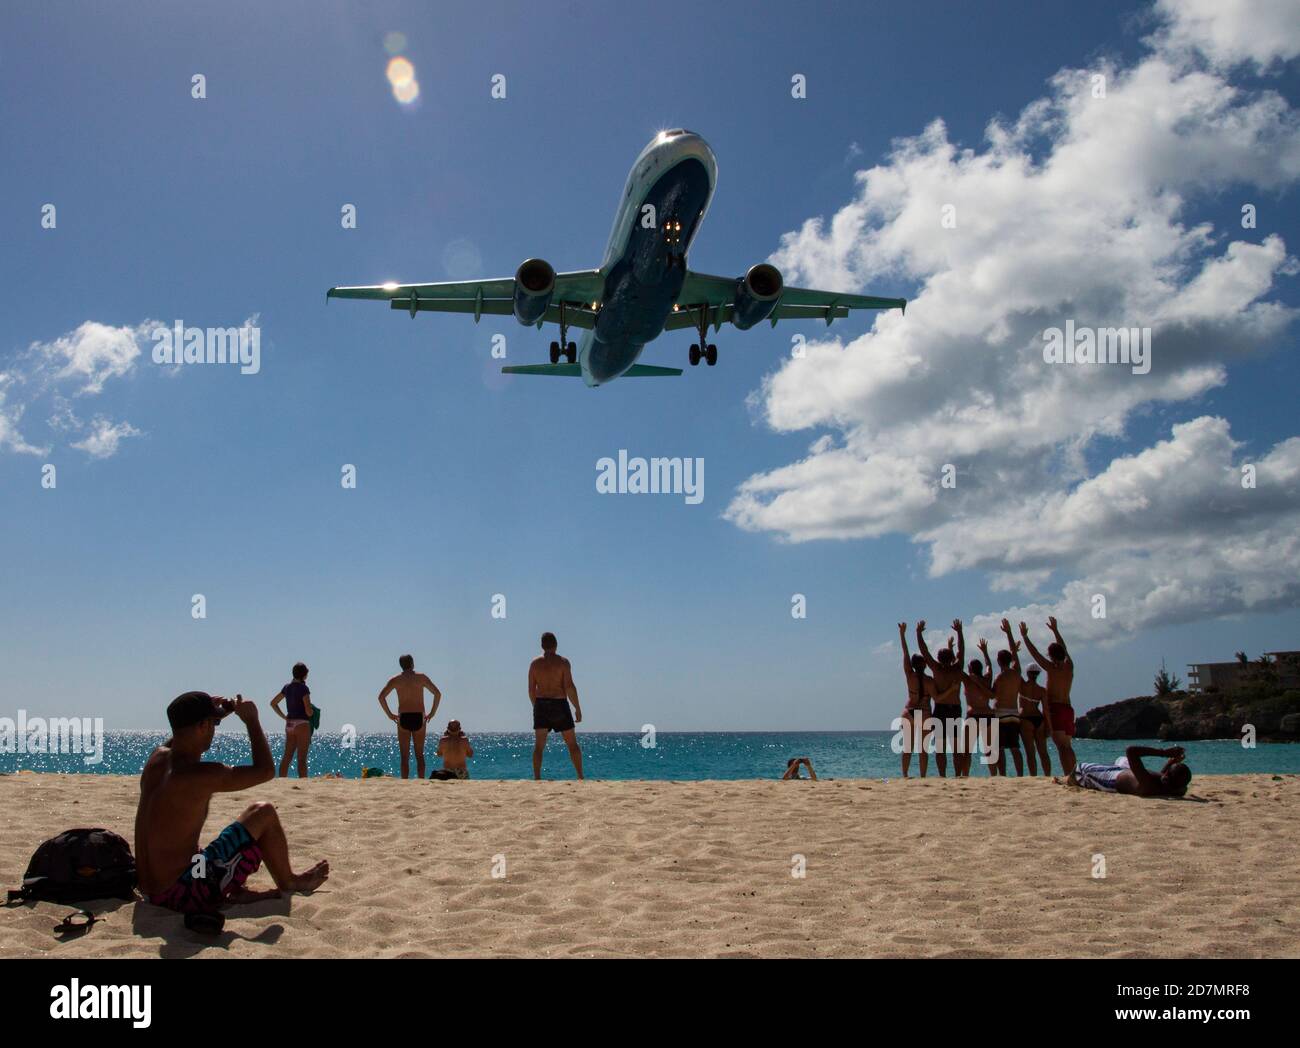 Princess Juliana International Airport is the main airport on the Caribbean island of Saint Martin/Sint Maarten and it's very close to the beach Stock Photo